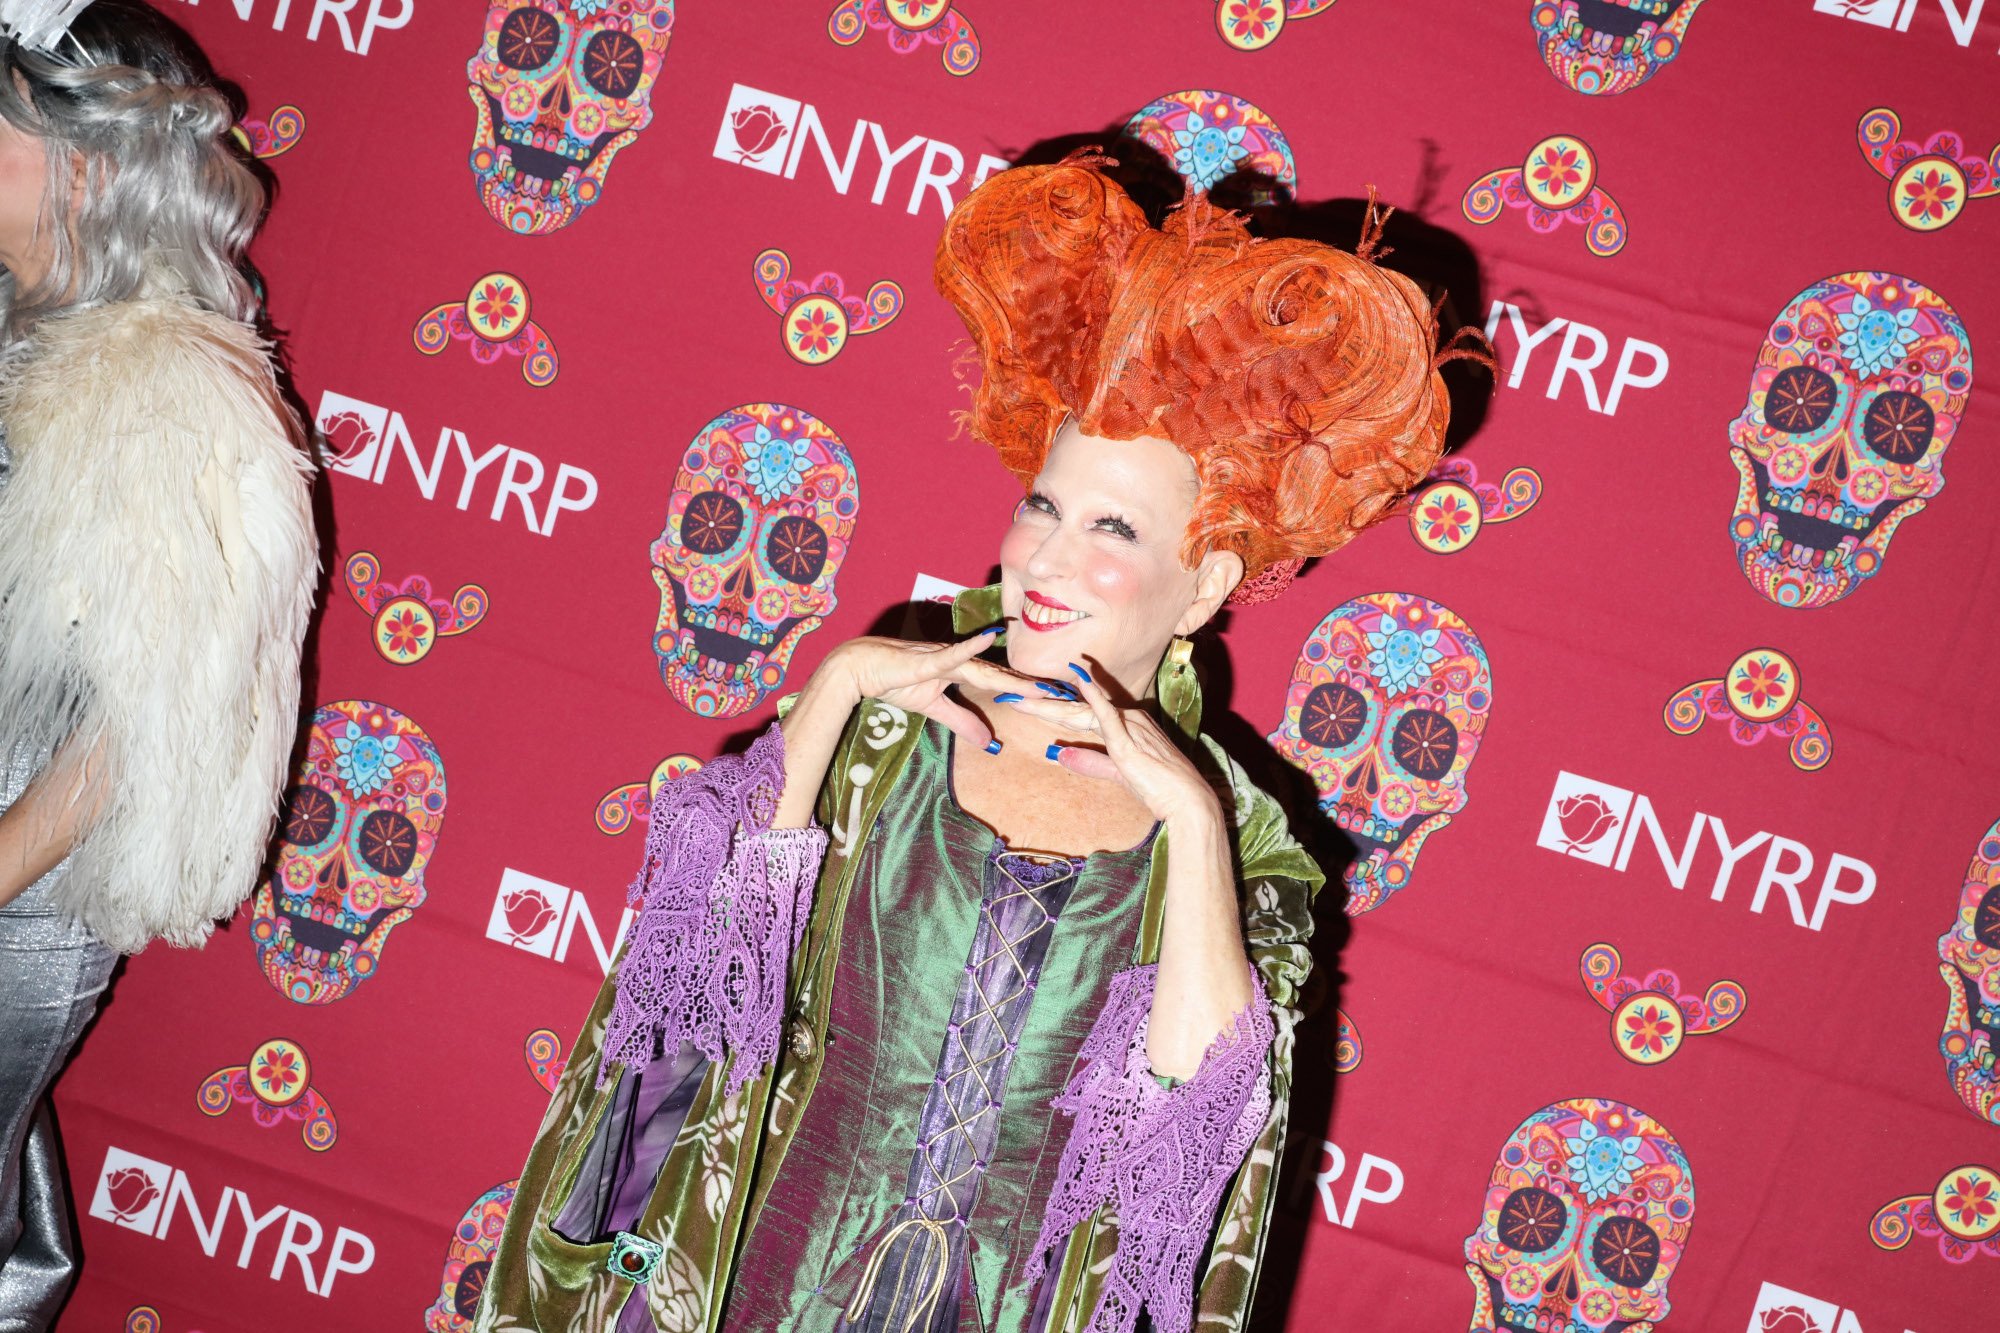 Bette Midler dressed as Winifred Sanderson from 'Hocus Pocus.' She's returning for 'Hocus Pocus 2' on Disney+. In the photo, she's wearing the witch's orange wig and green and purple dress.